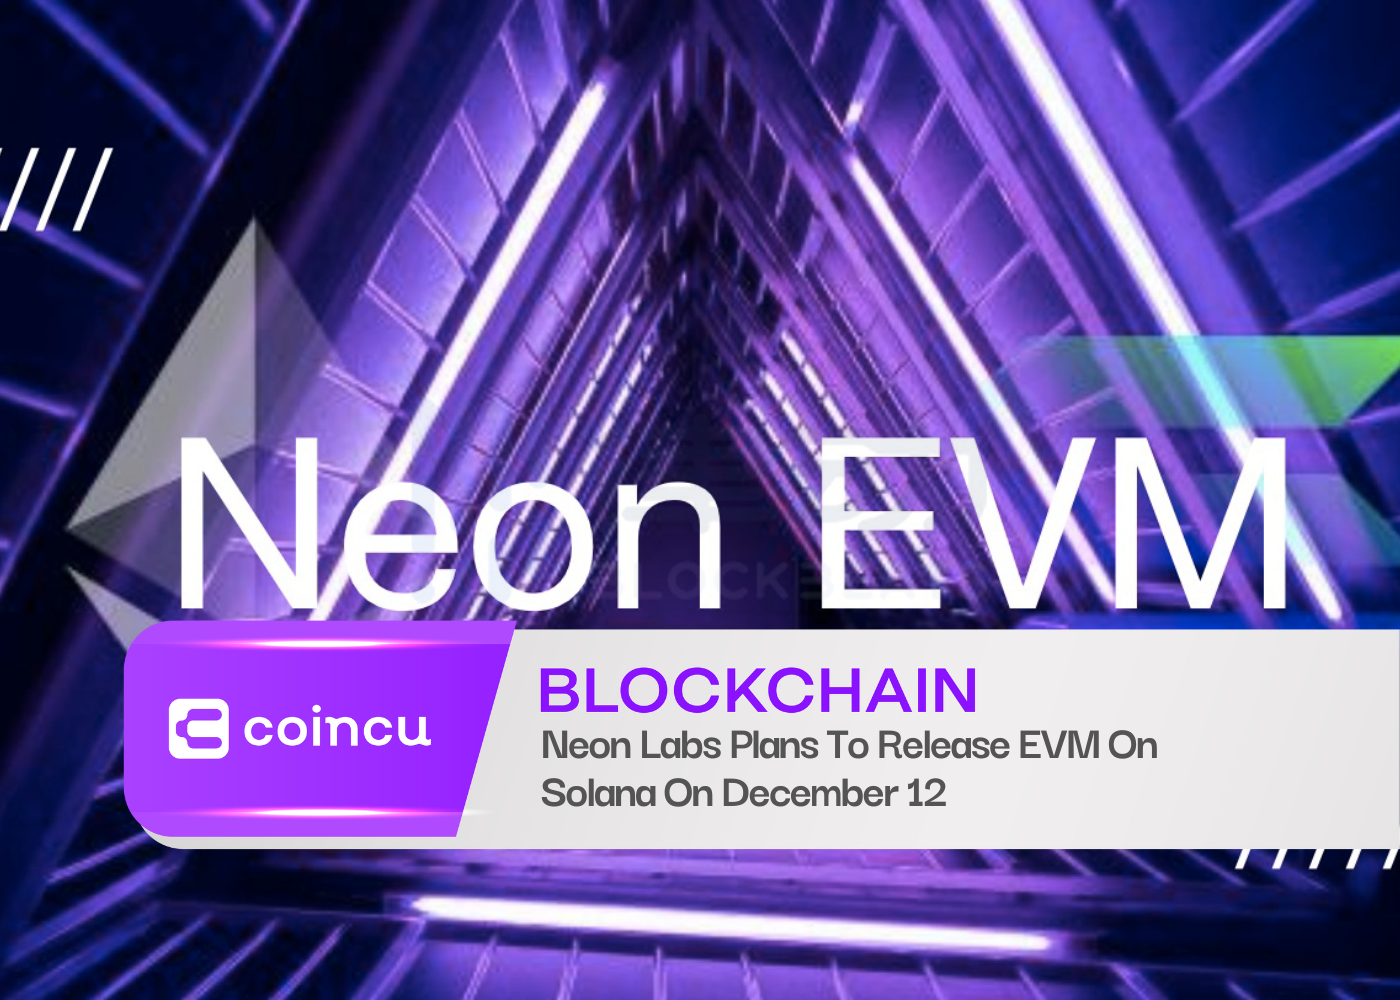 Neon Labs Plans To Release EVM On Solana On December 12